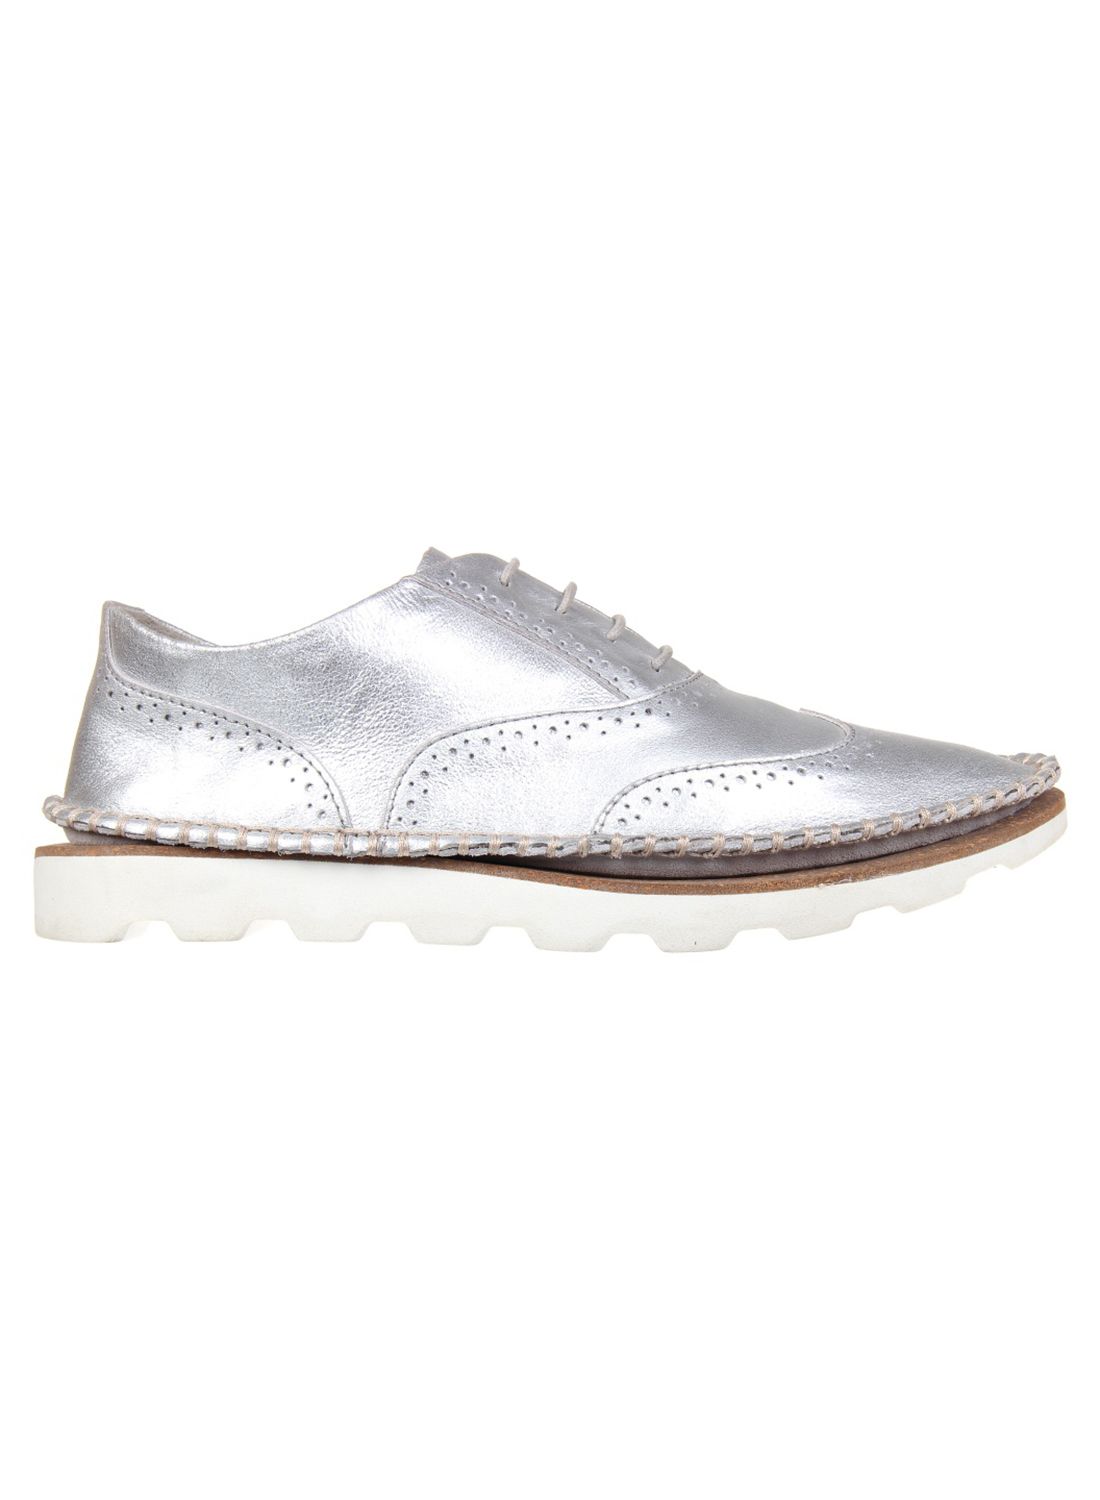 Clarks Silver Casual Shoes Price in India- Buy Clarks Silver Casual ...